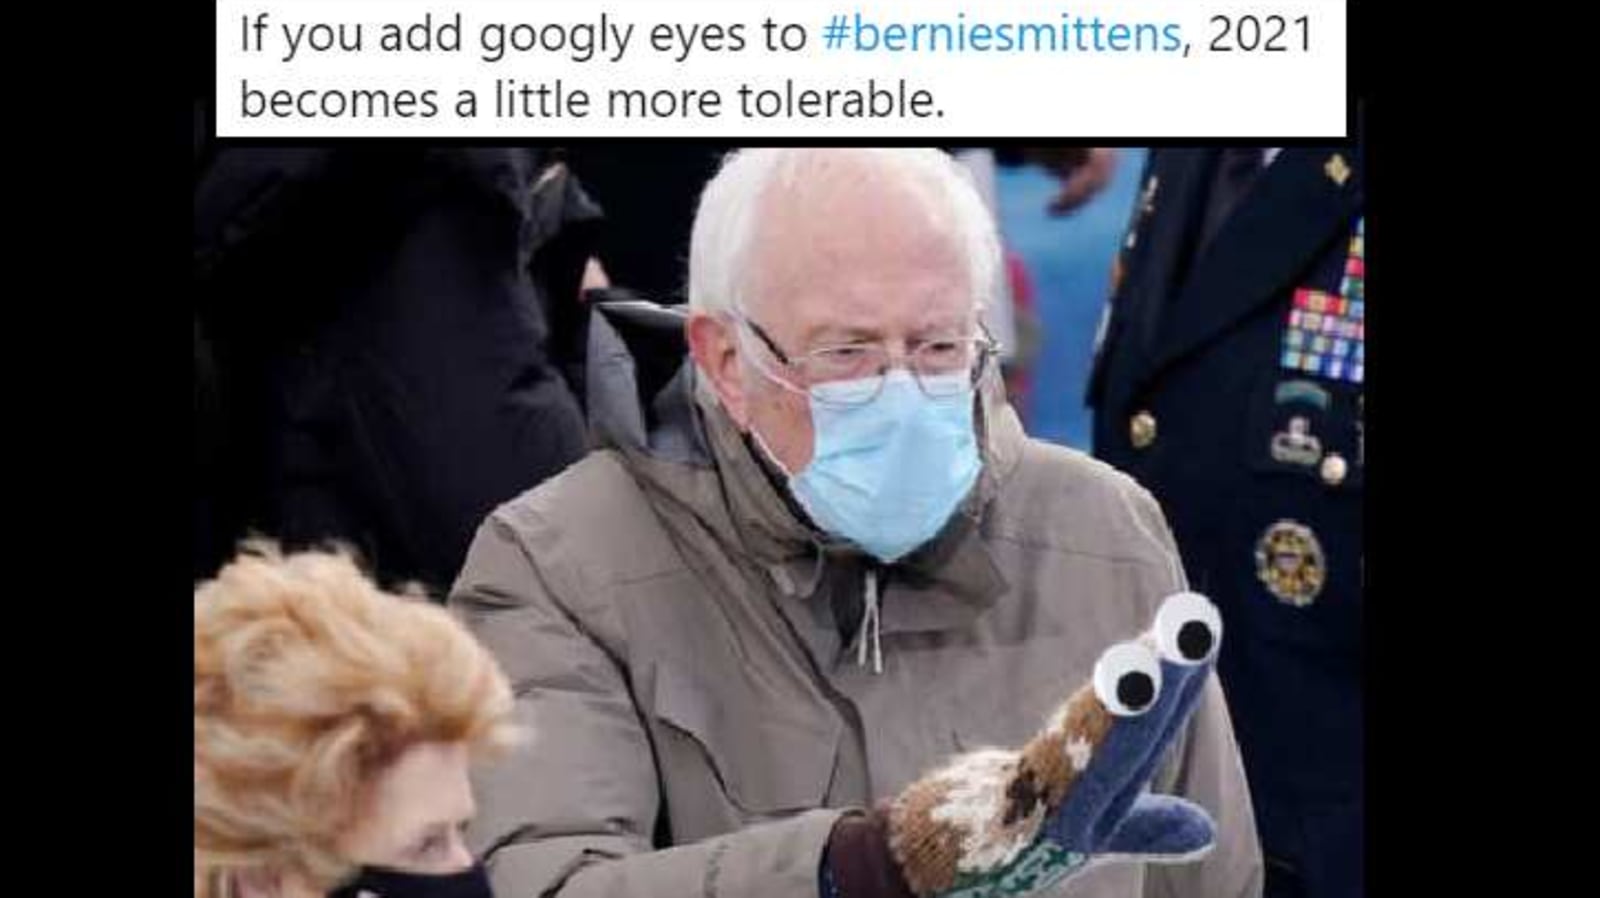 bernie-sanders-wins-inauguration-day-meme-fest-with-his-mittens-seen-them-yet-trending